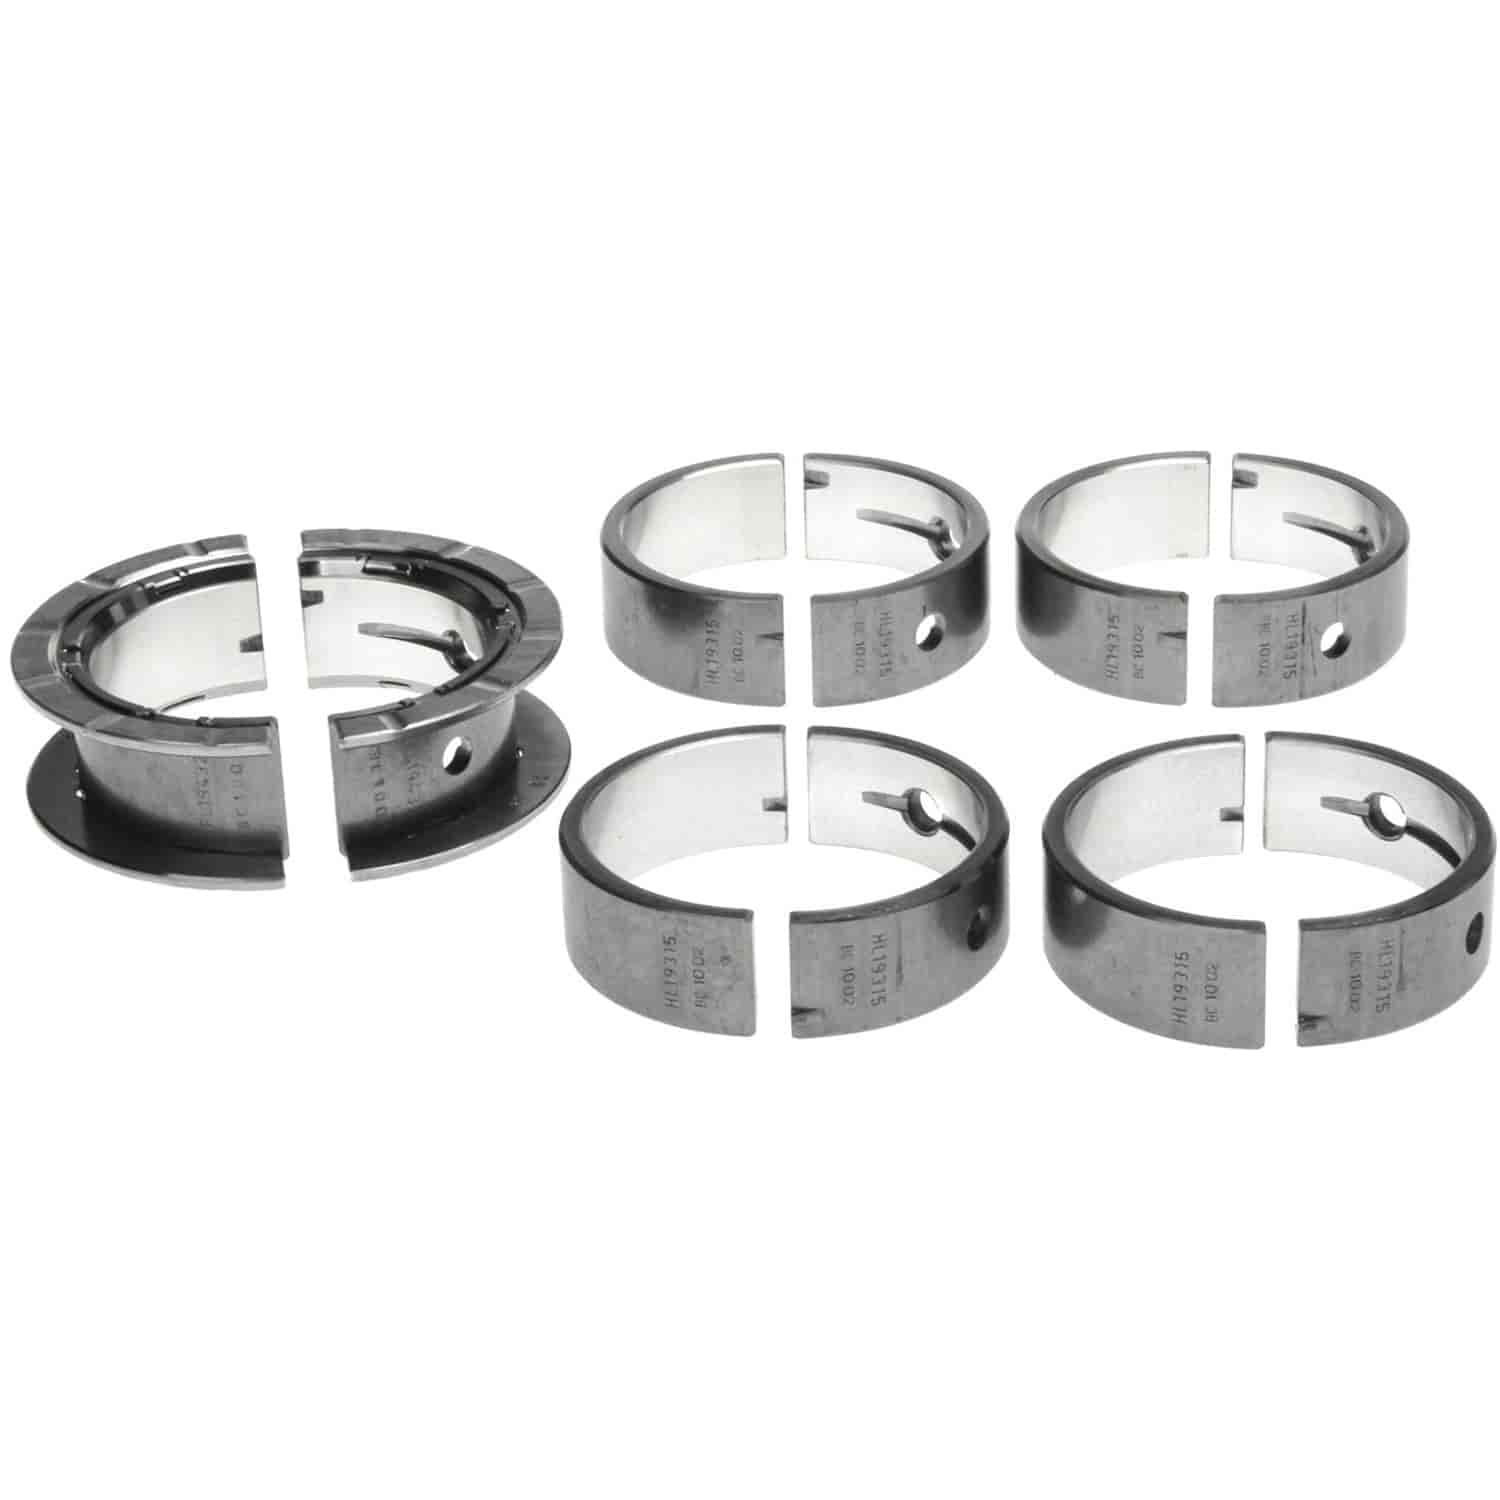 Main Bearing Set Chevy 2000-2015 L4 Ecotec 2.0/2.2/2.4L with -.020" Undersize